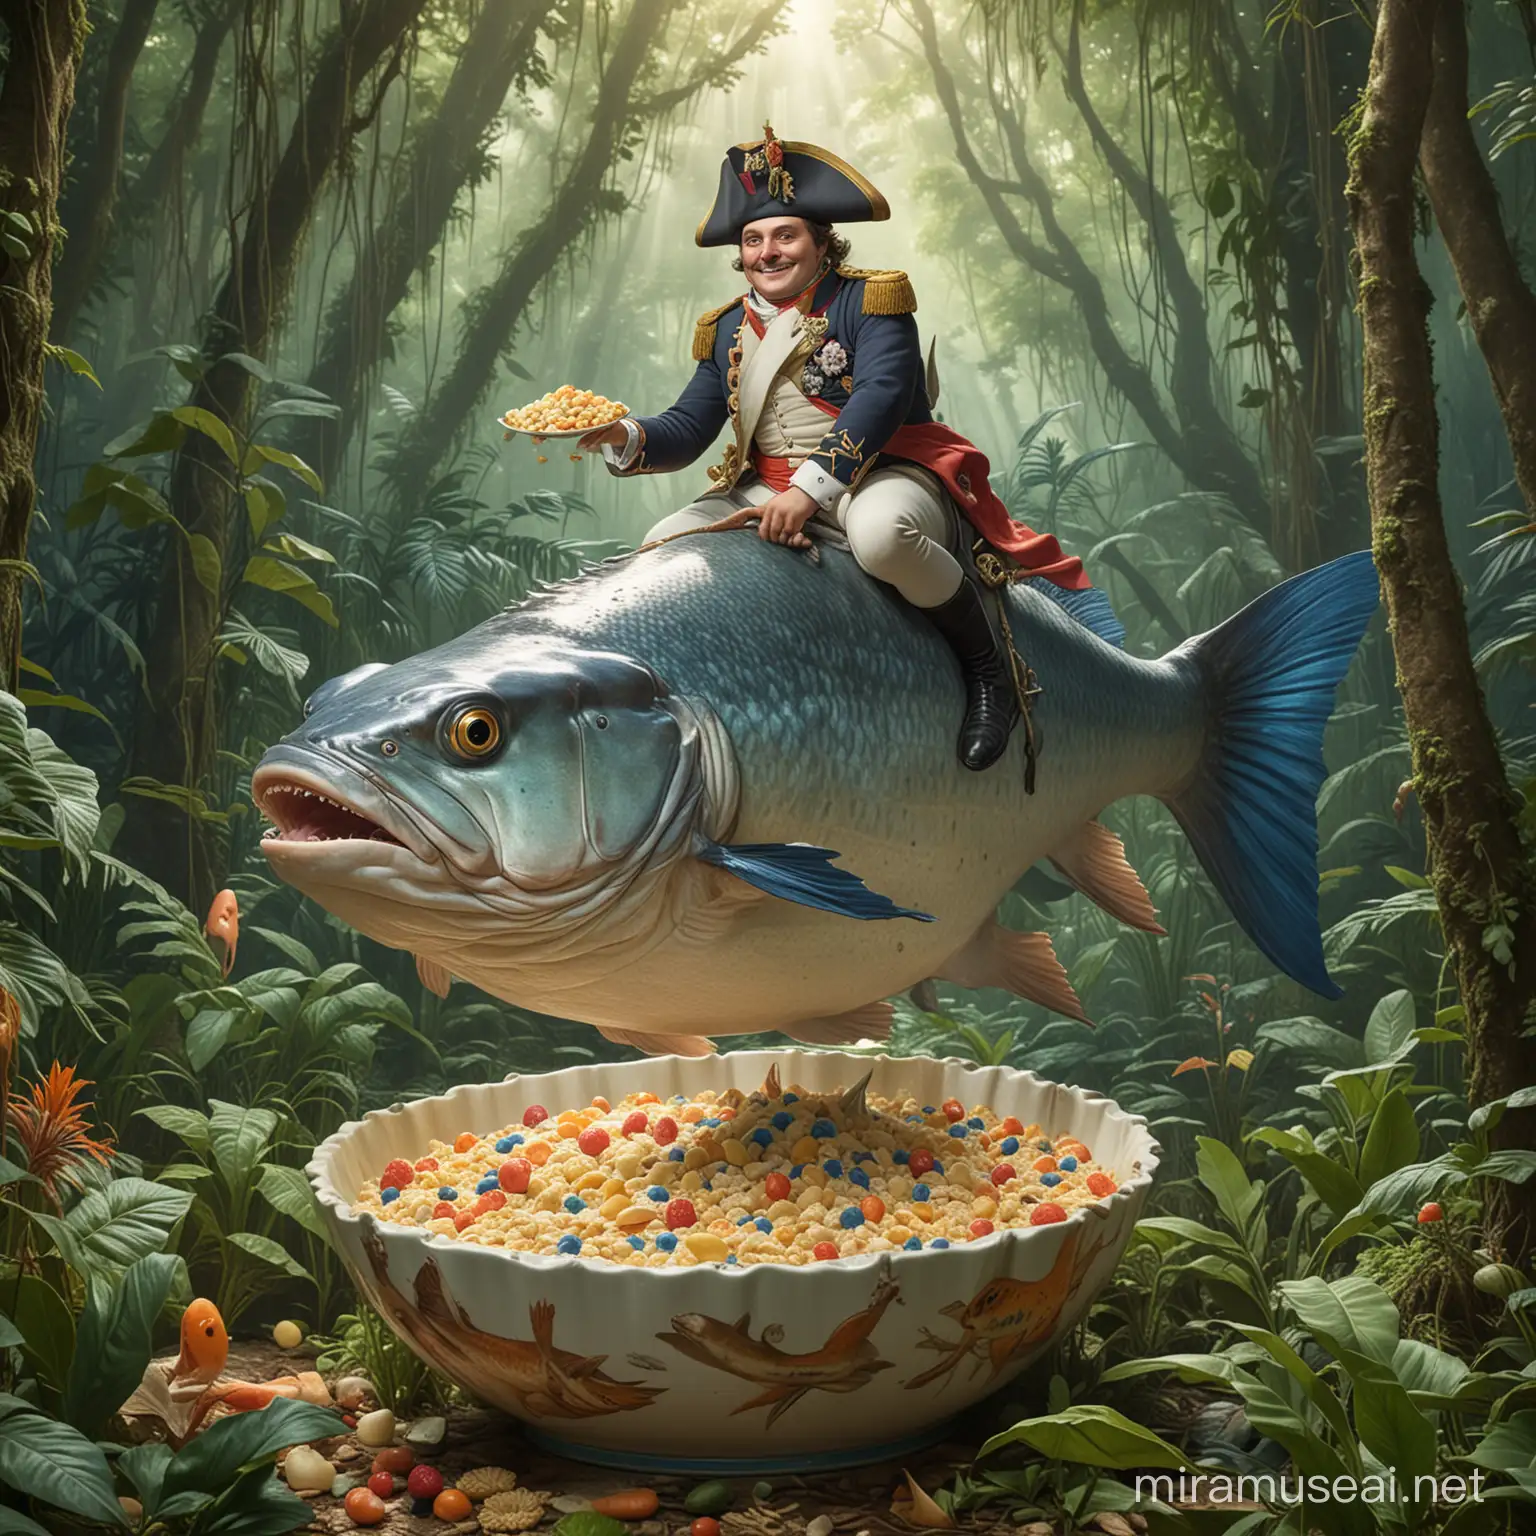 A happy Napoleon rides a giant fish in the jungle while eating cereal from a bowl shaped like a panty butt